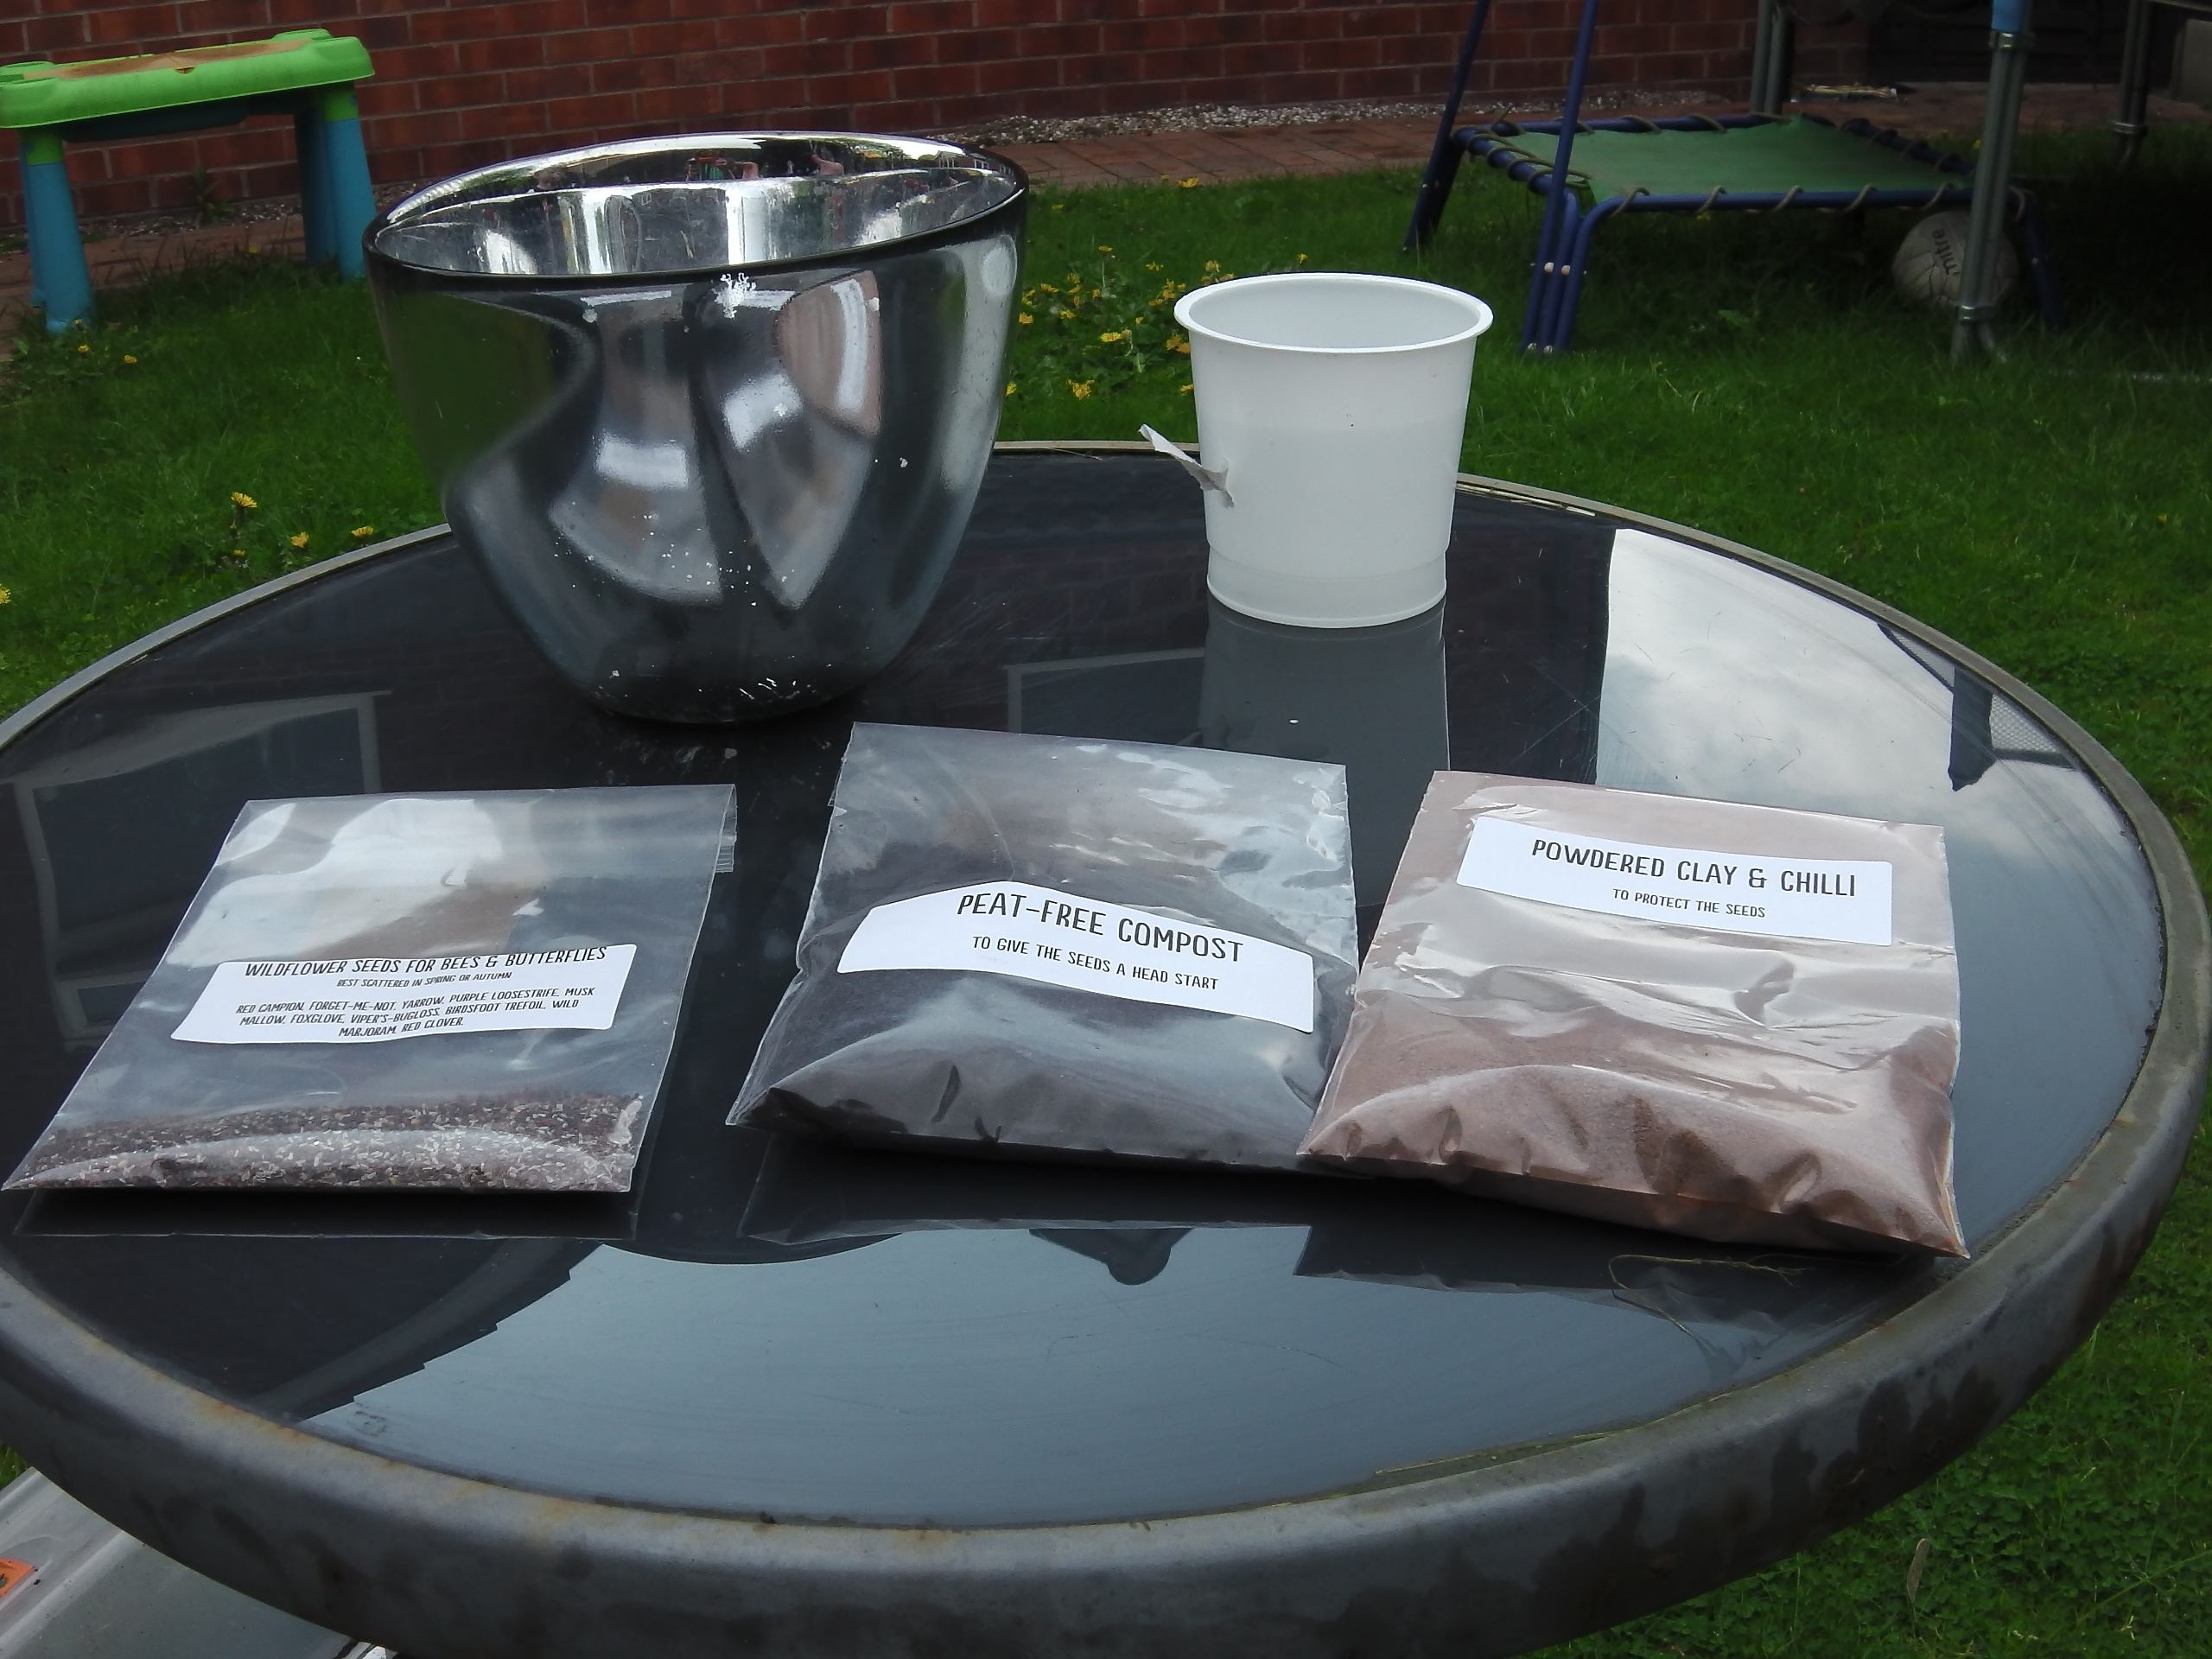 Seedball kit contents - everything you need to make your seed balls